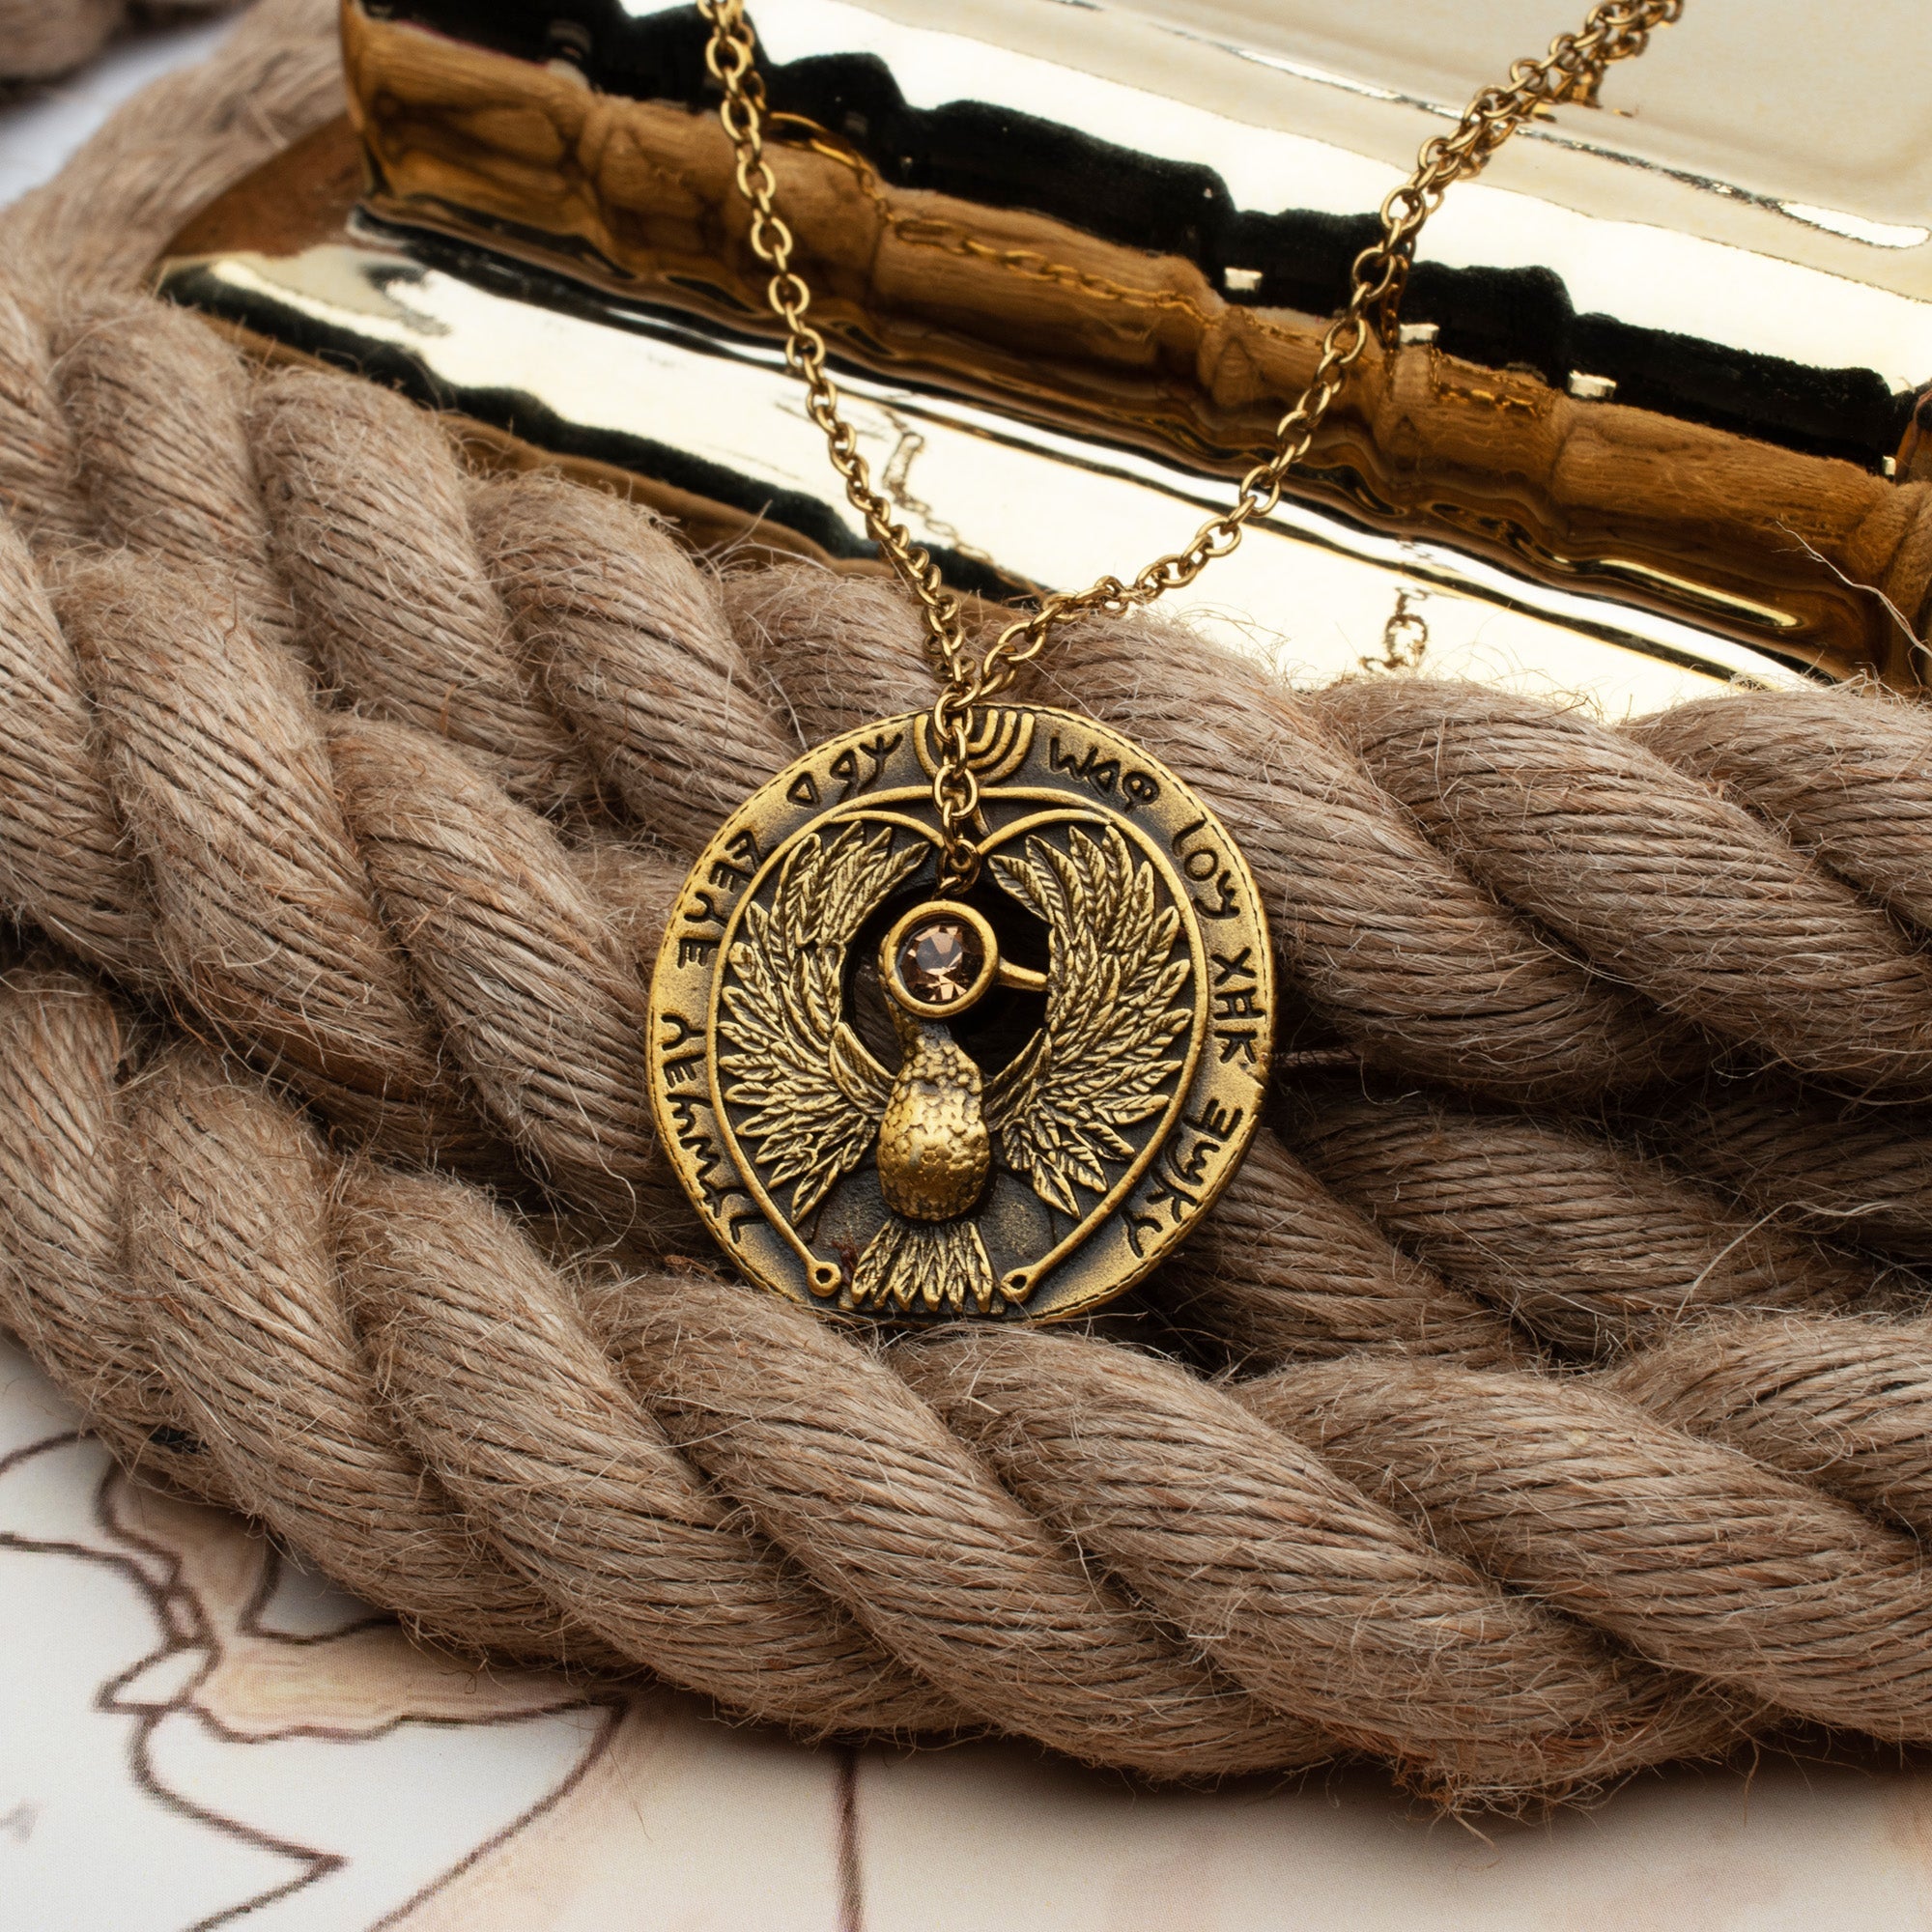 Indiana Jones Raiders of the Lost Ark Actual Size Replica of Talisman Necklace